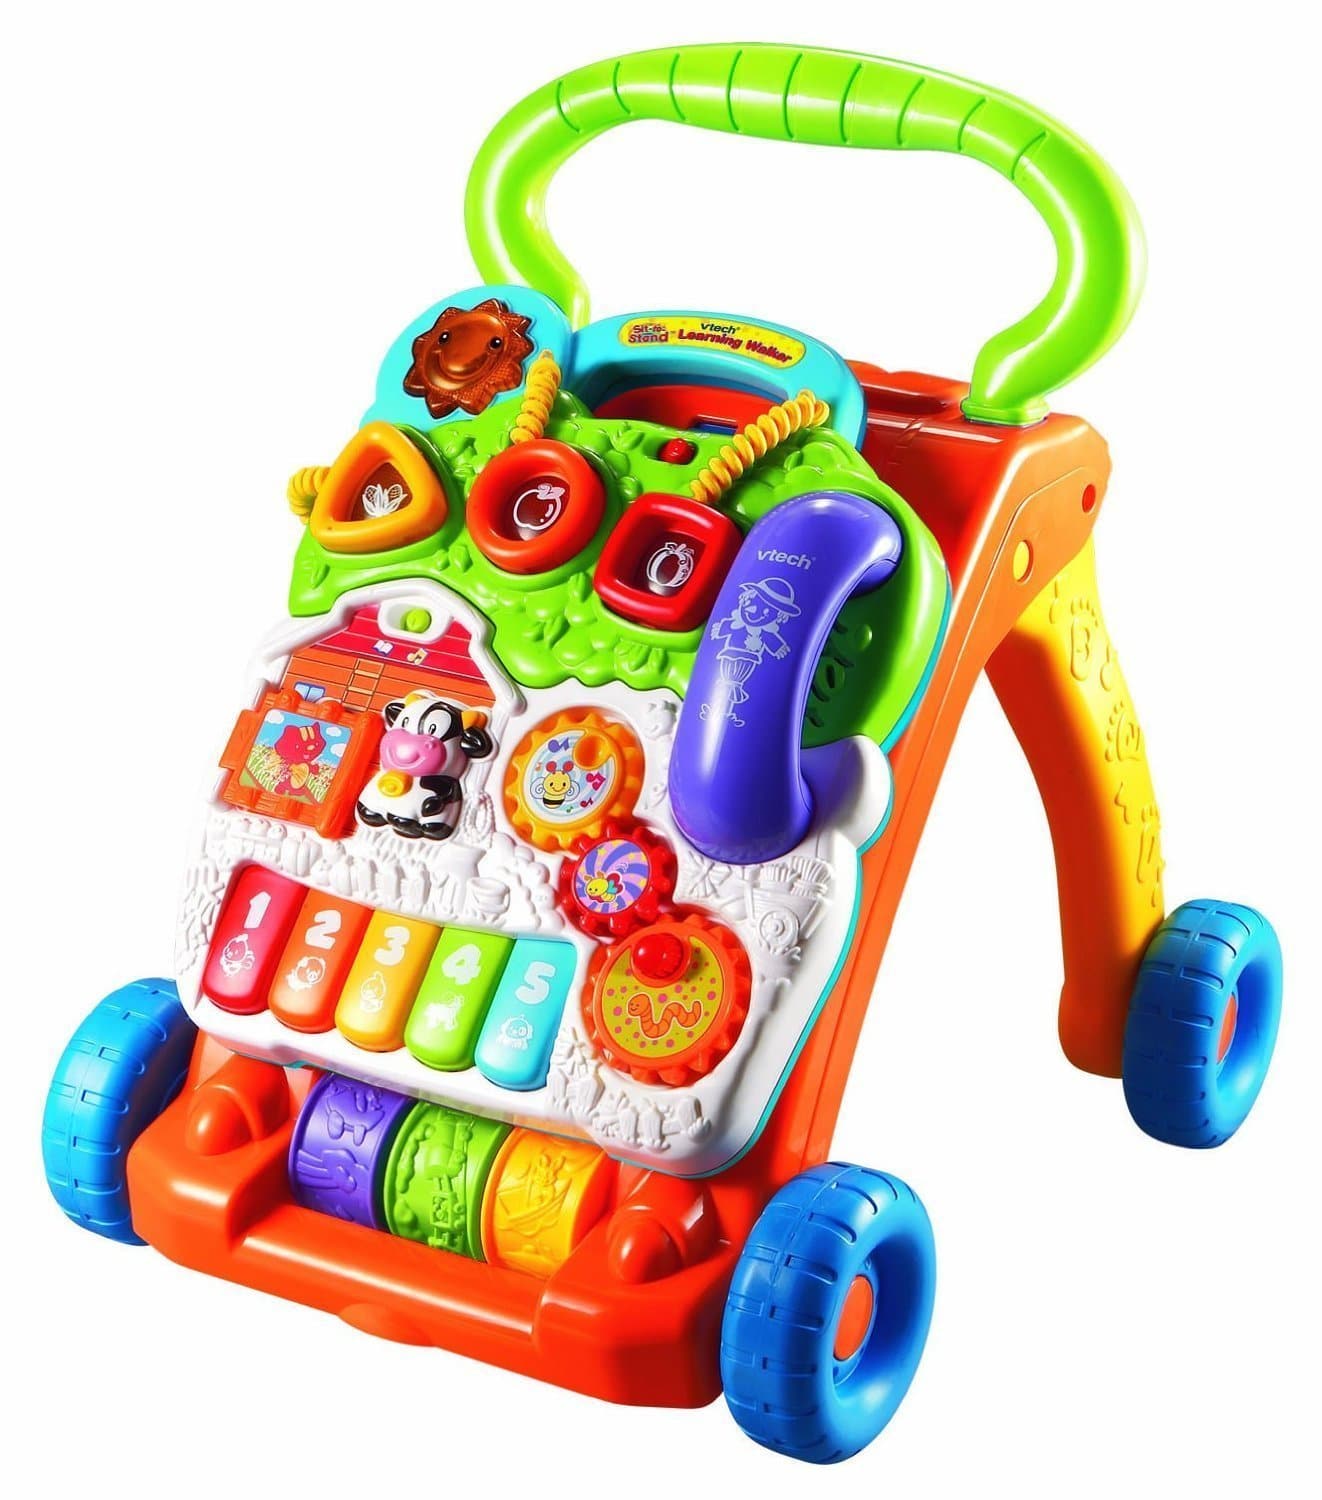 VTech Sit-to-Stand Learning Walker Review - Blogger